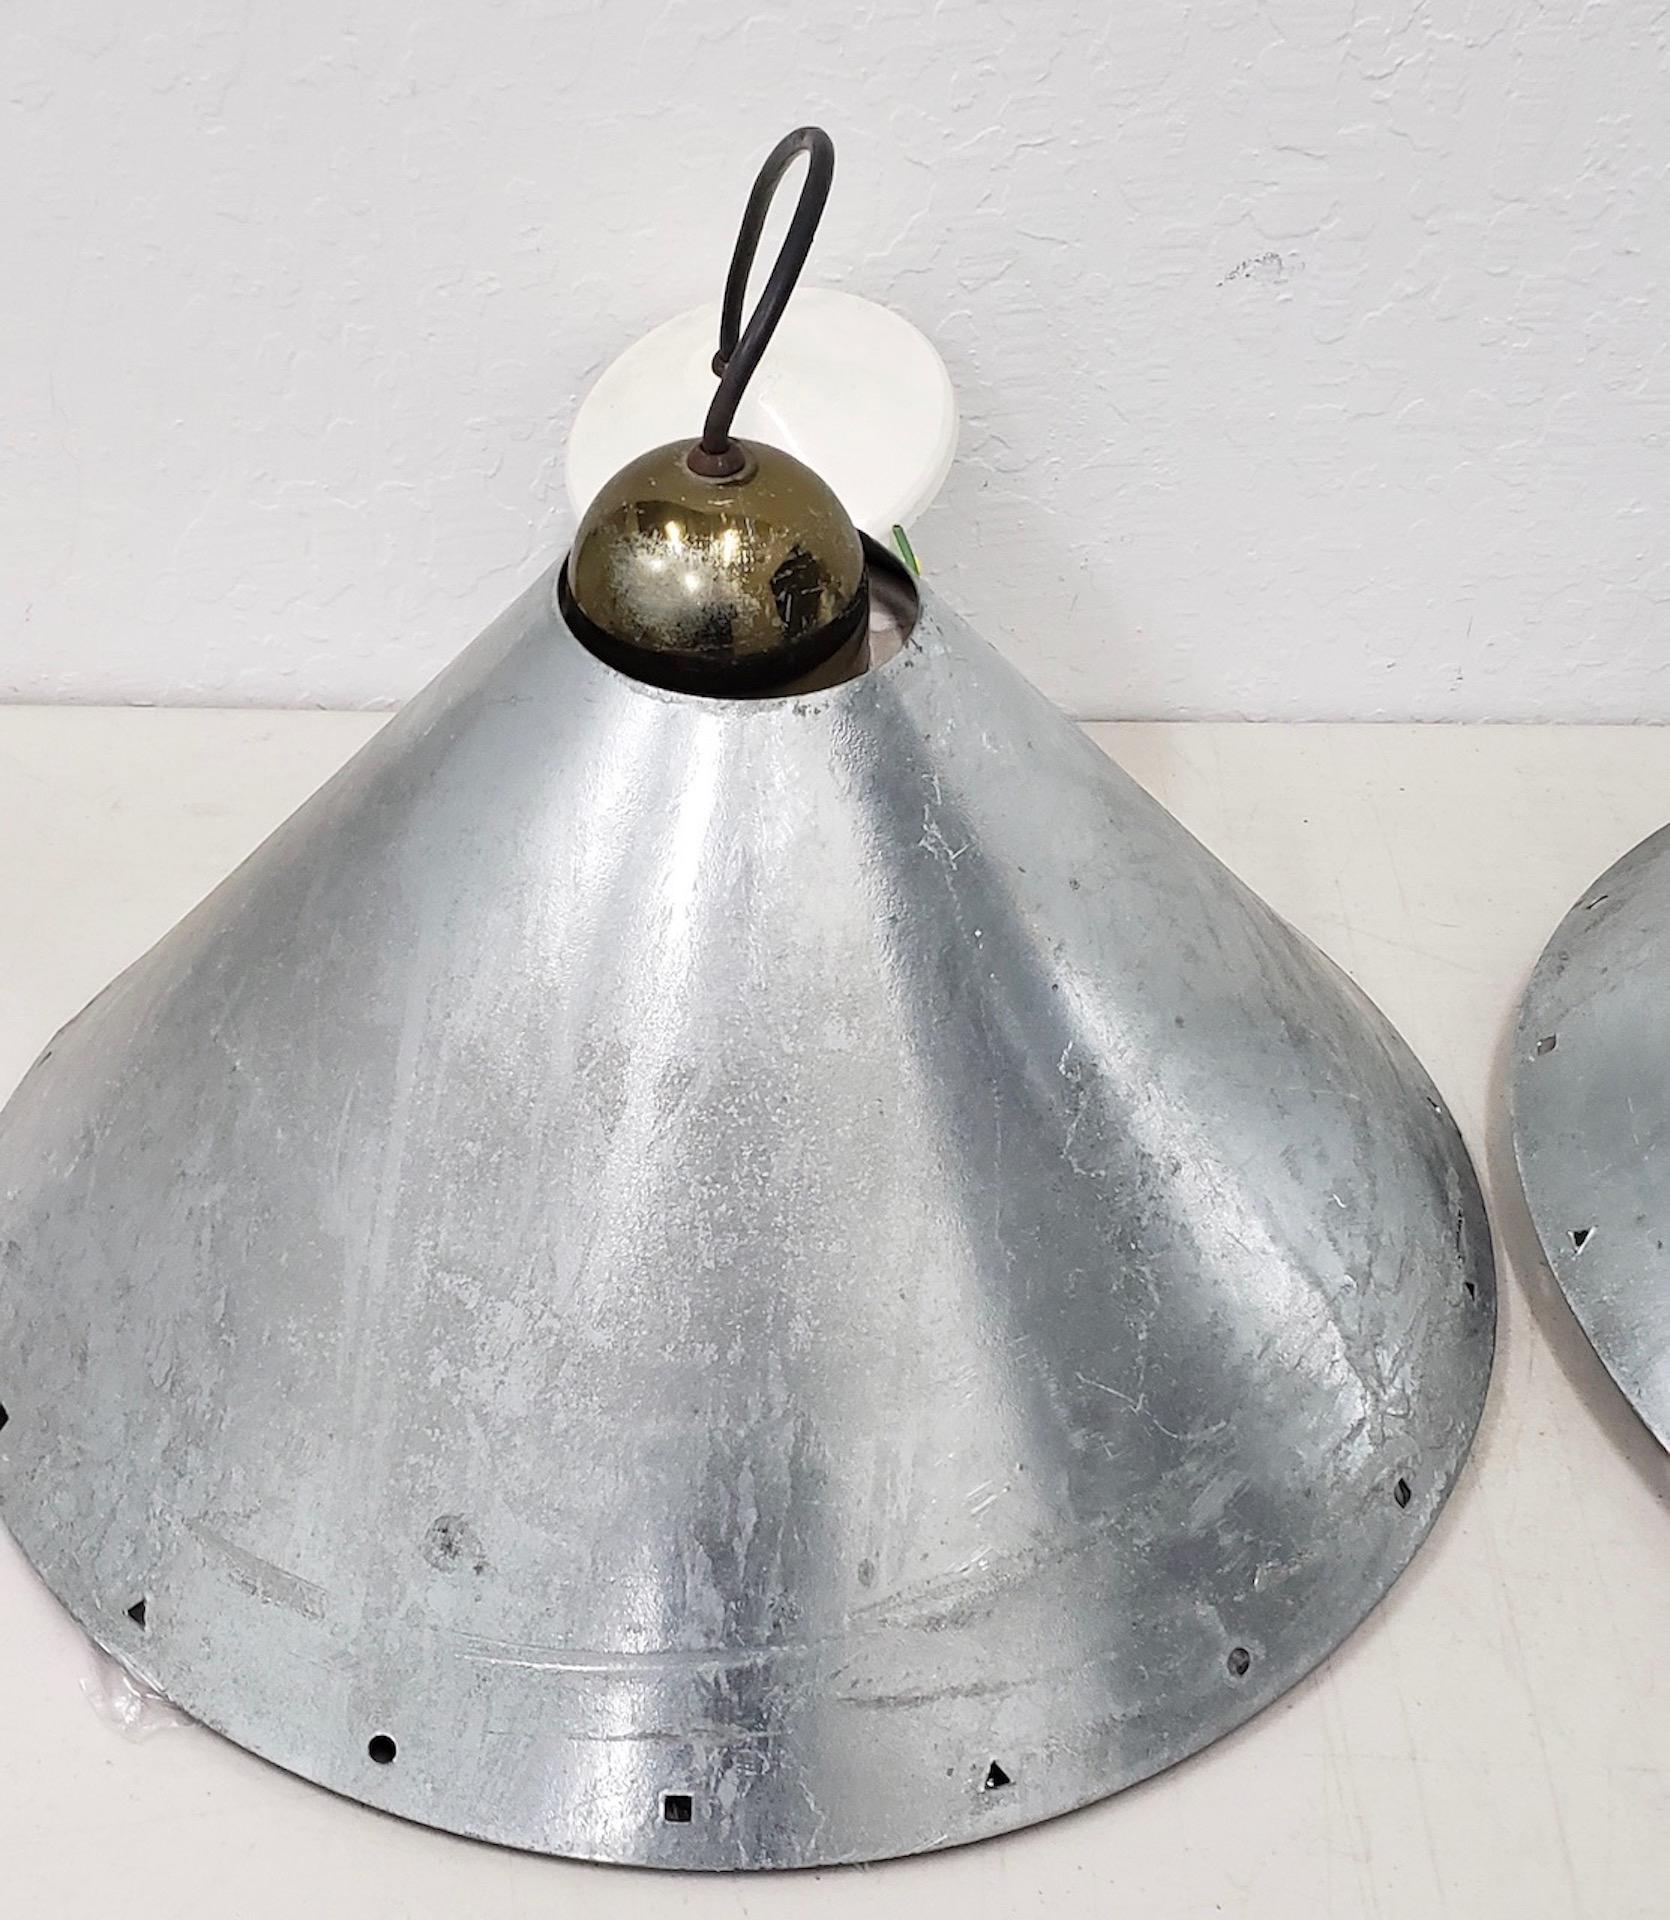 Set of three modernist steel and zinc hanging lamps by Ron Rezek circa 1980

Dimensions 17